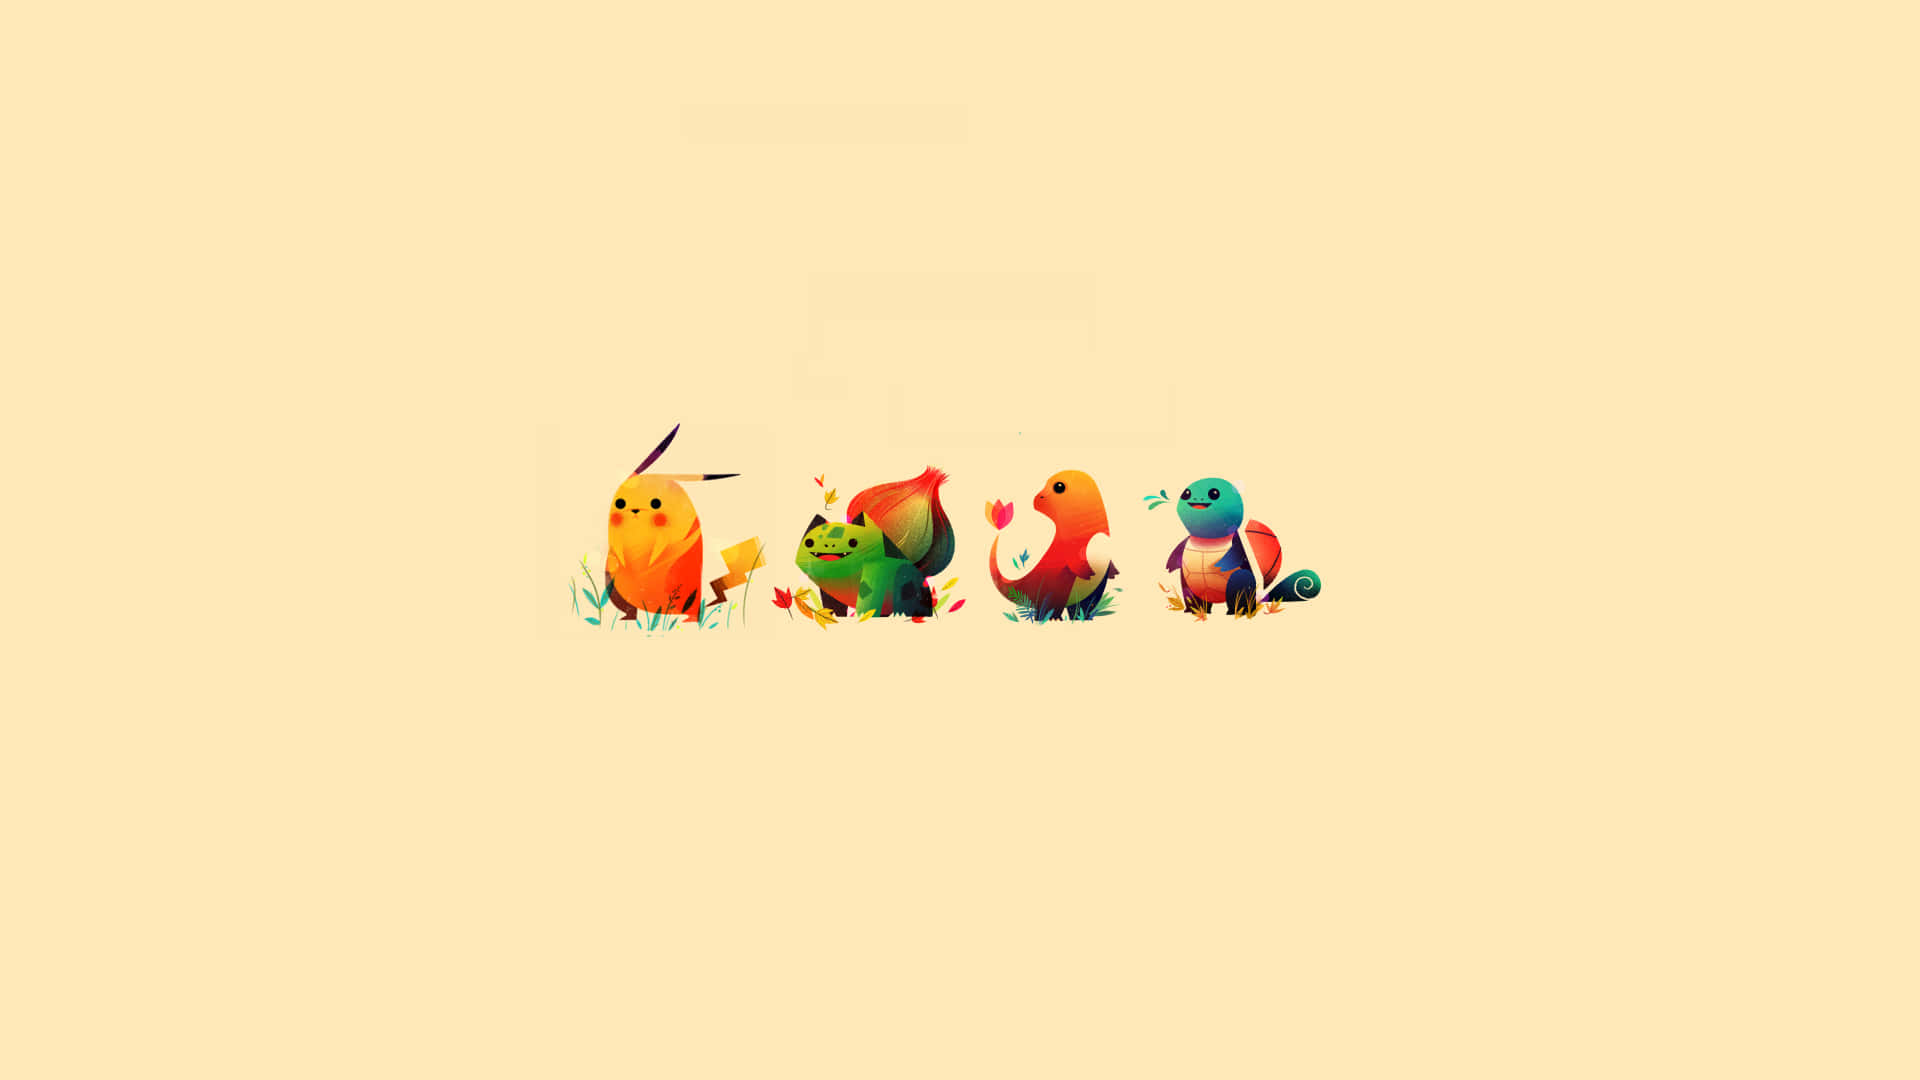 Cute Baby Pikachu And Other Pokemon Wallpaper